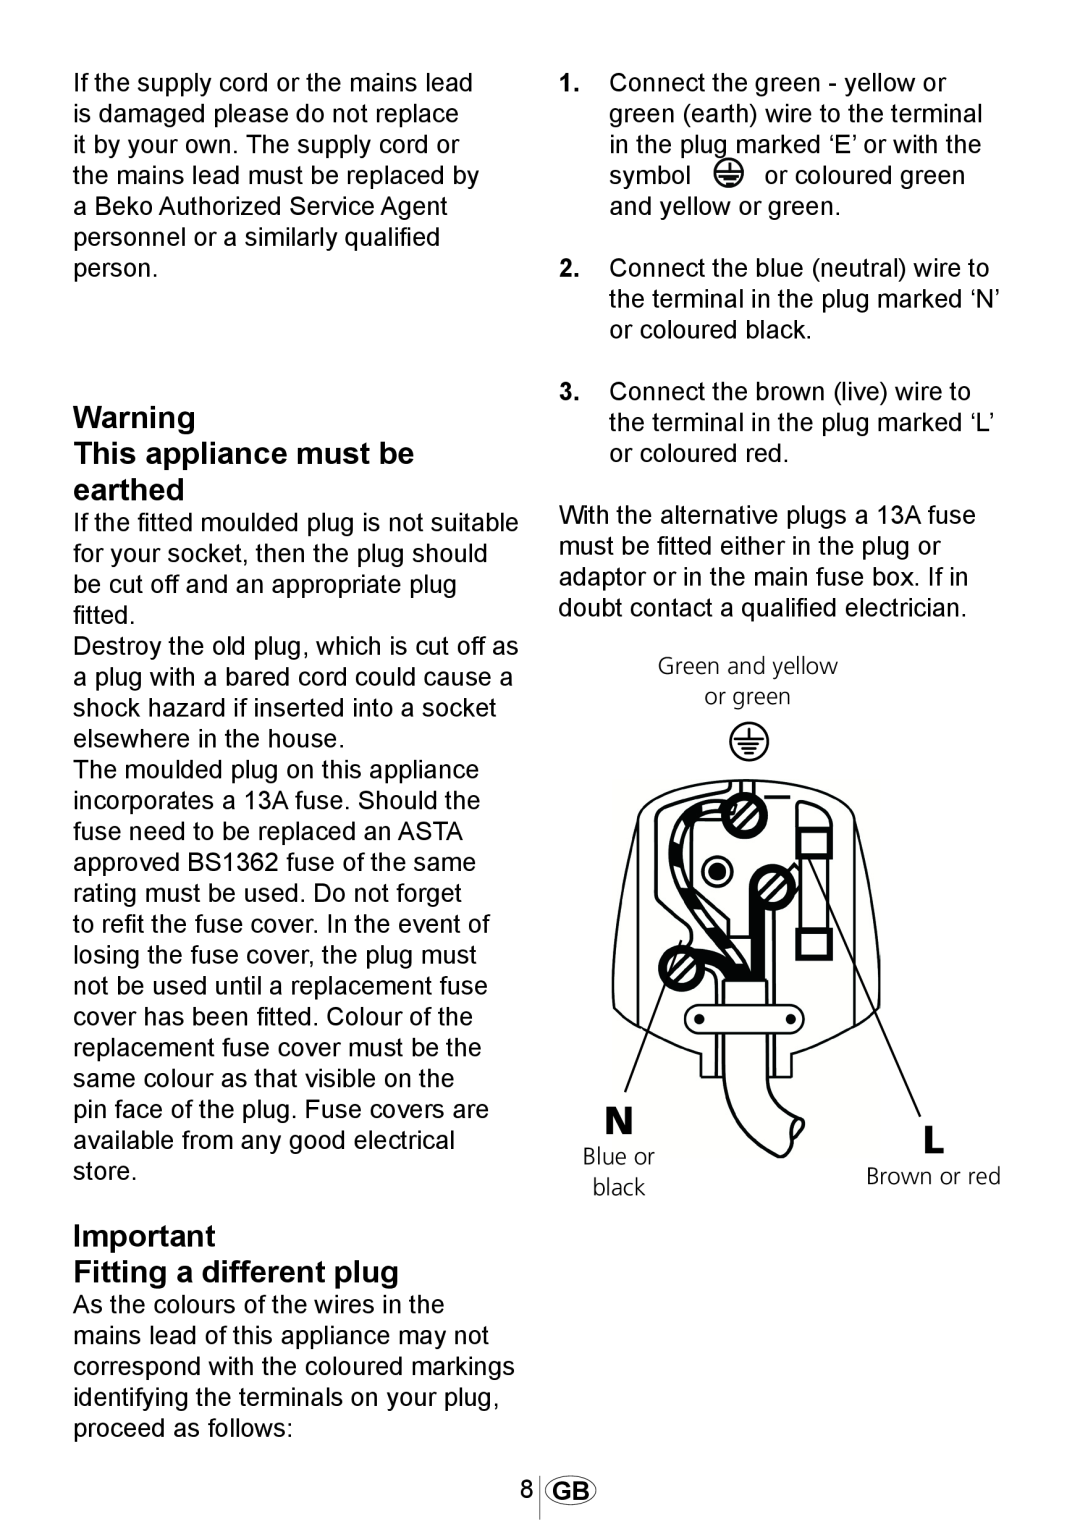 Beko DSFN1530 manual This appliance must be earthed, Fitting a different plug 